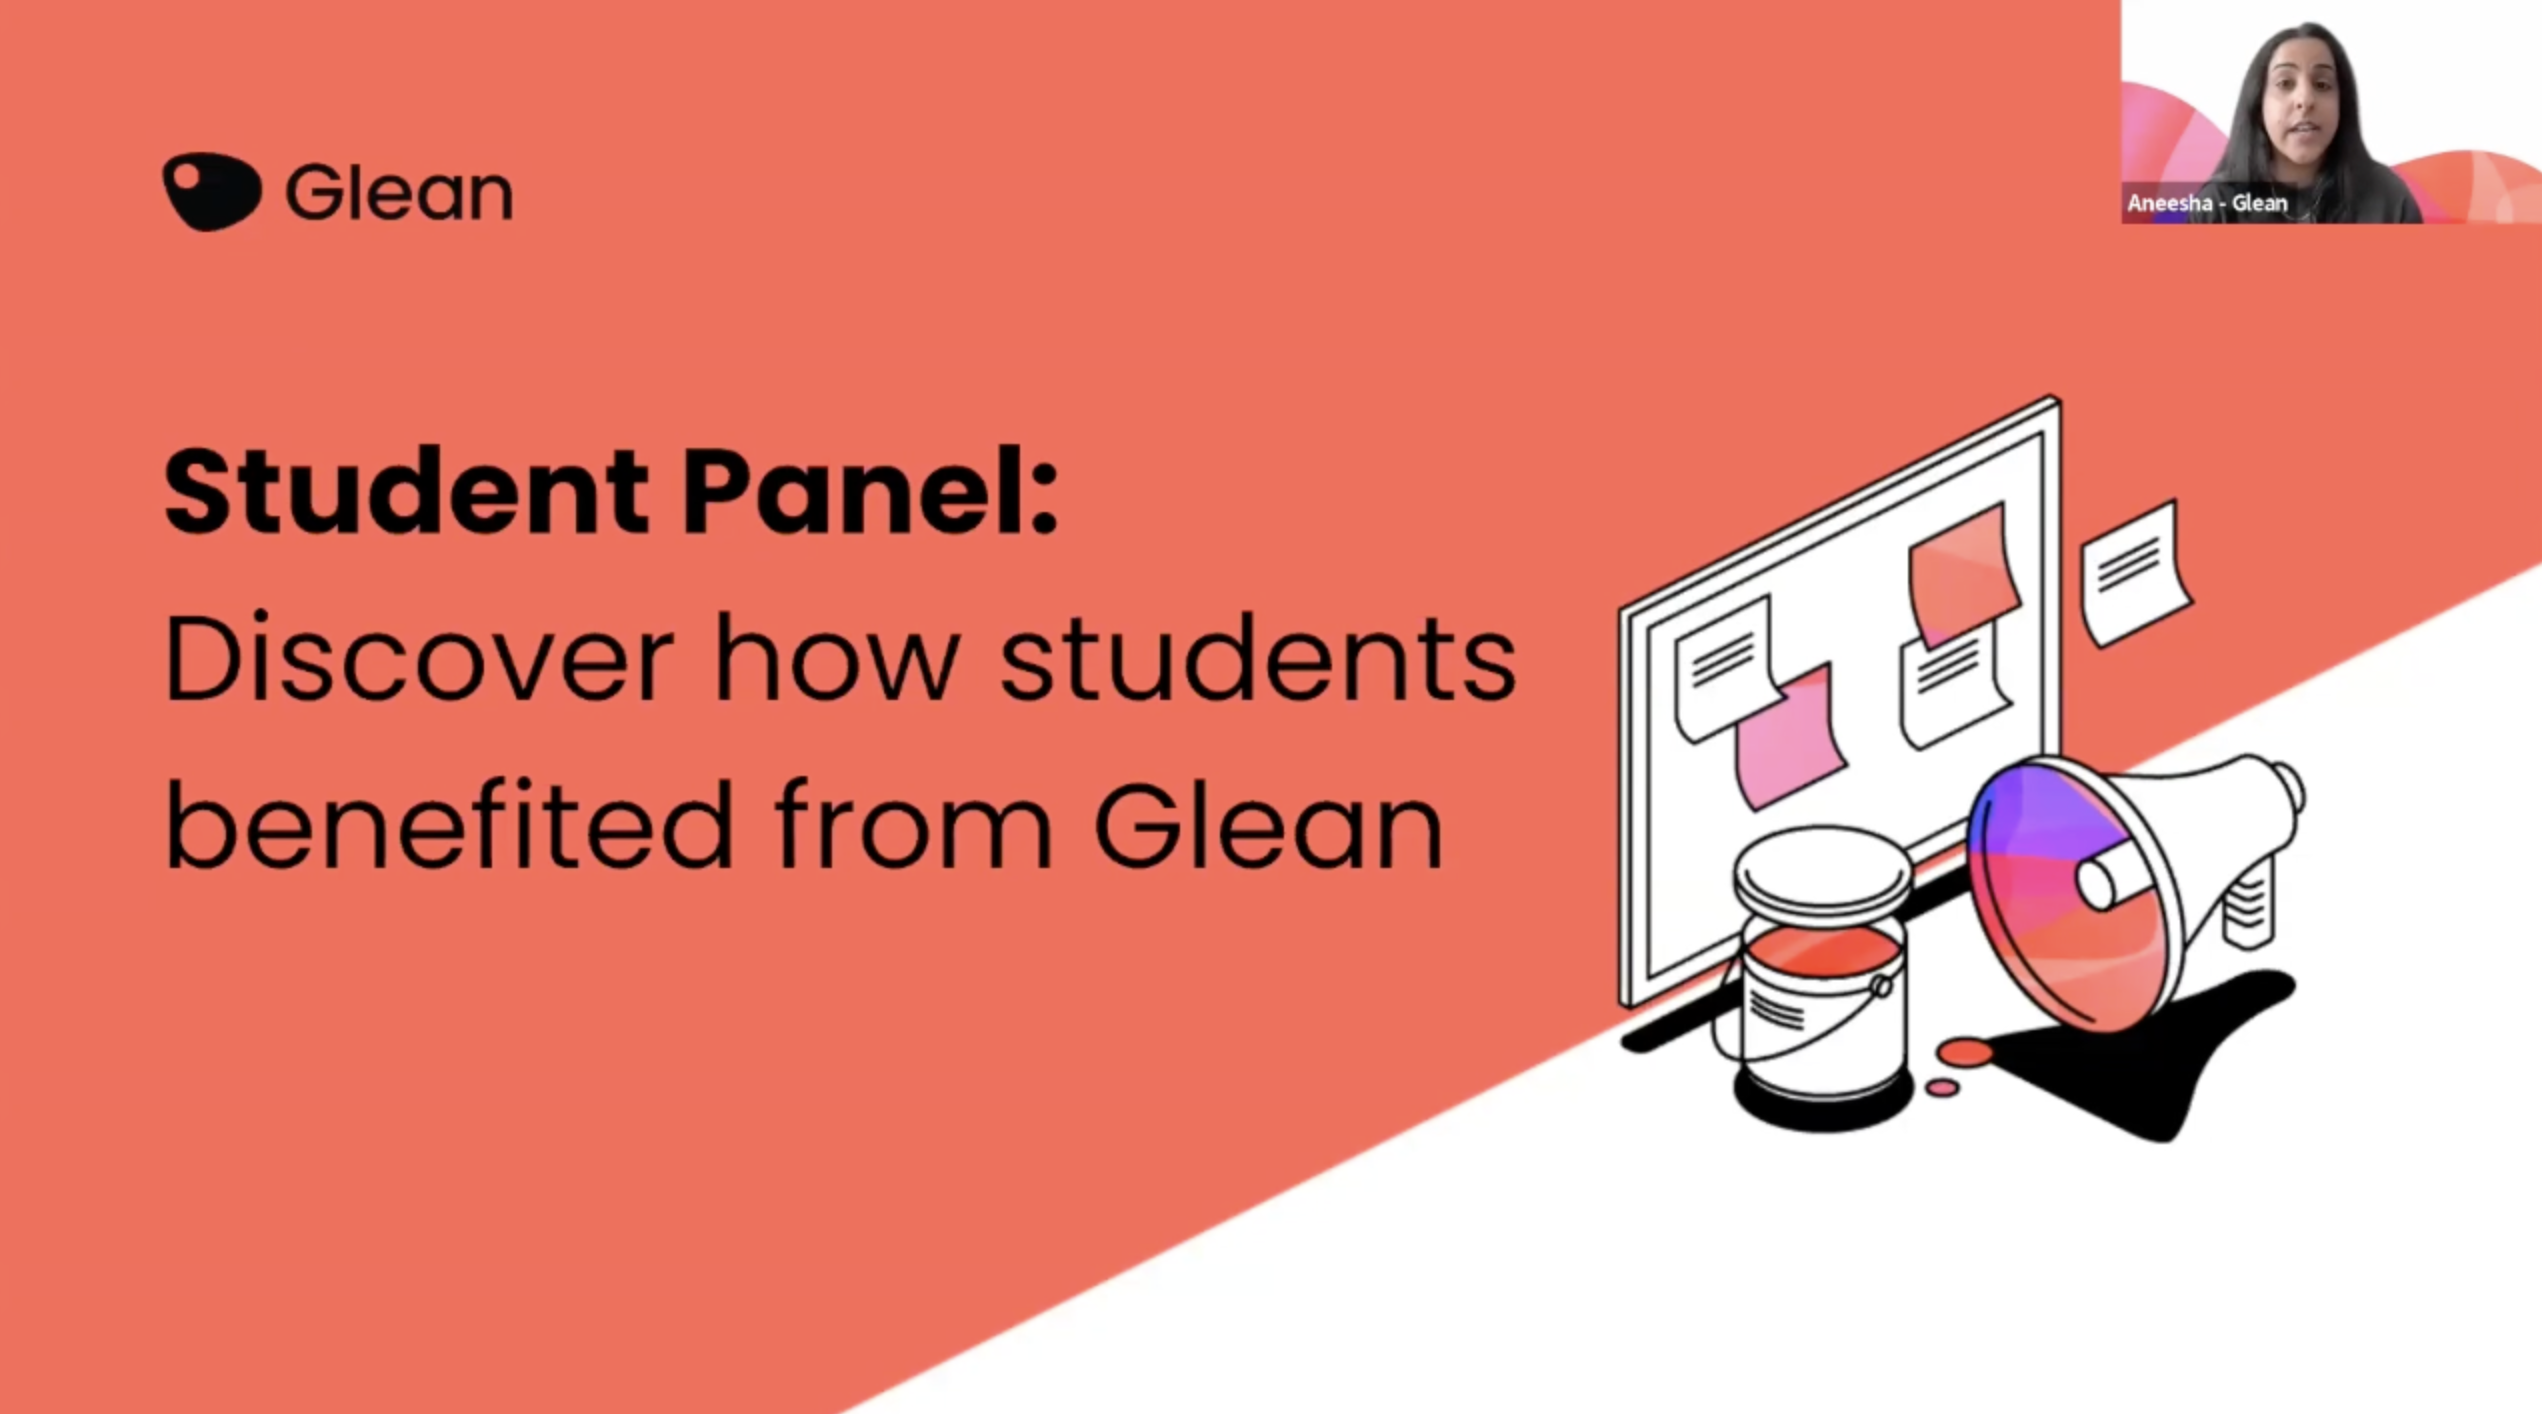 student_panel__discover_how_students_benefited_from_glean thumbnail